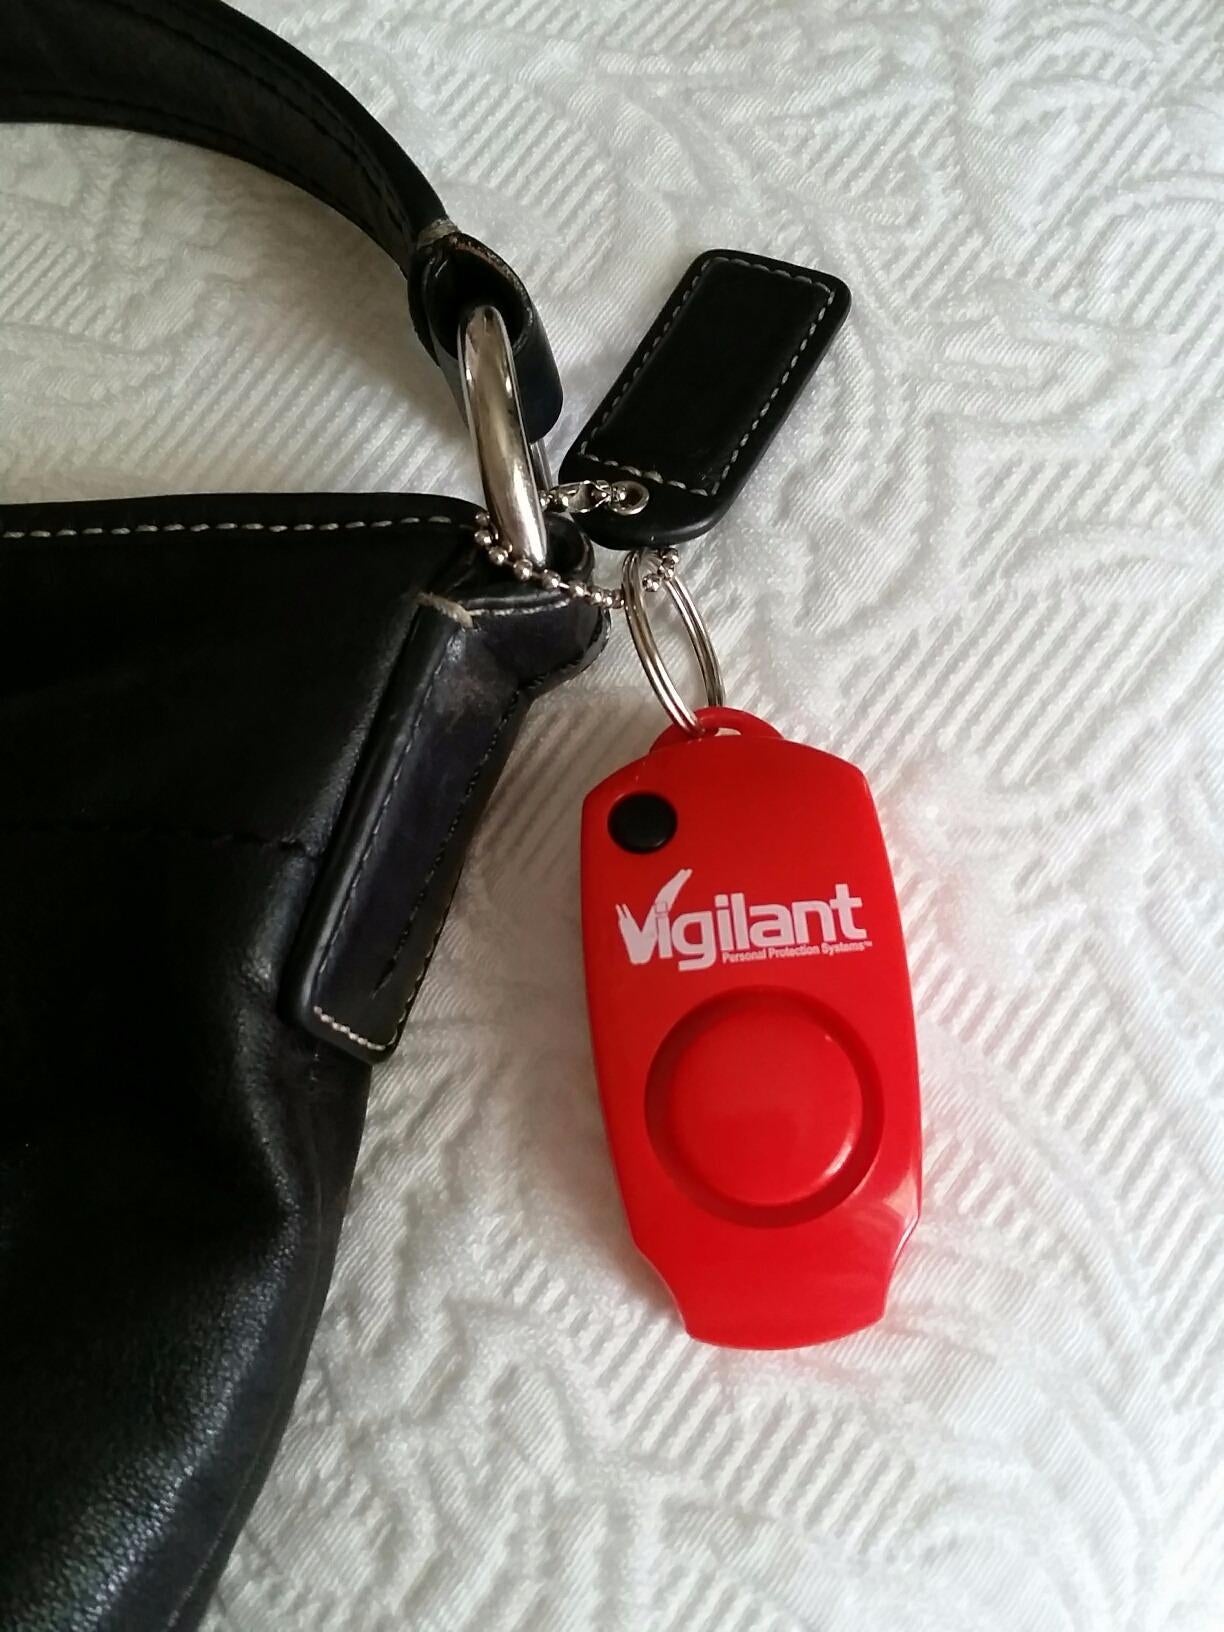 the red personal alarm attached to a bag